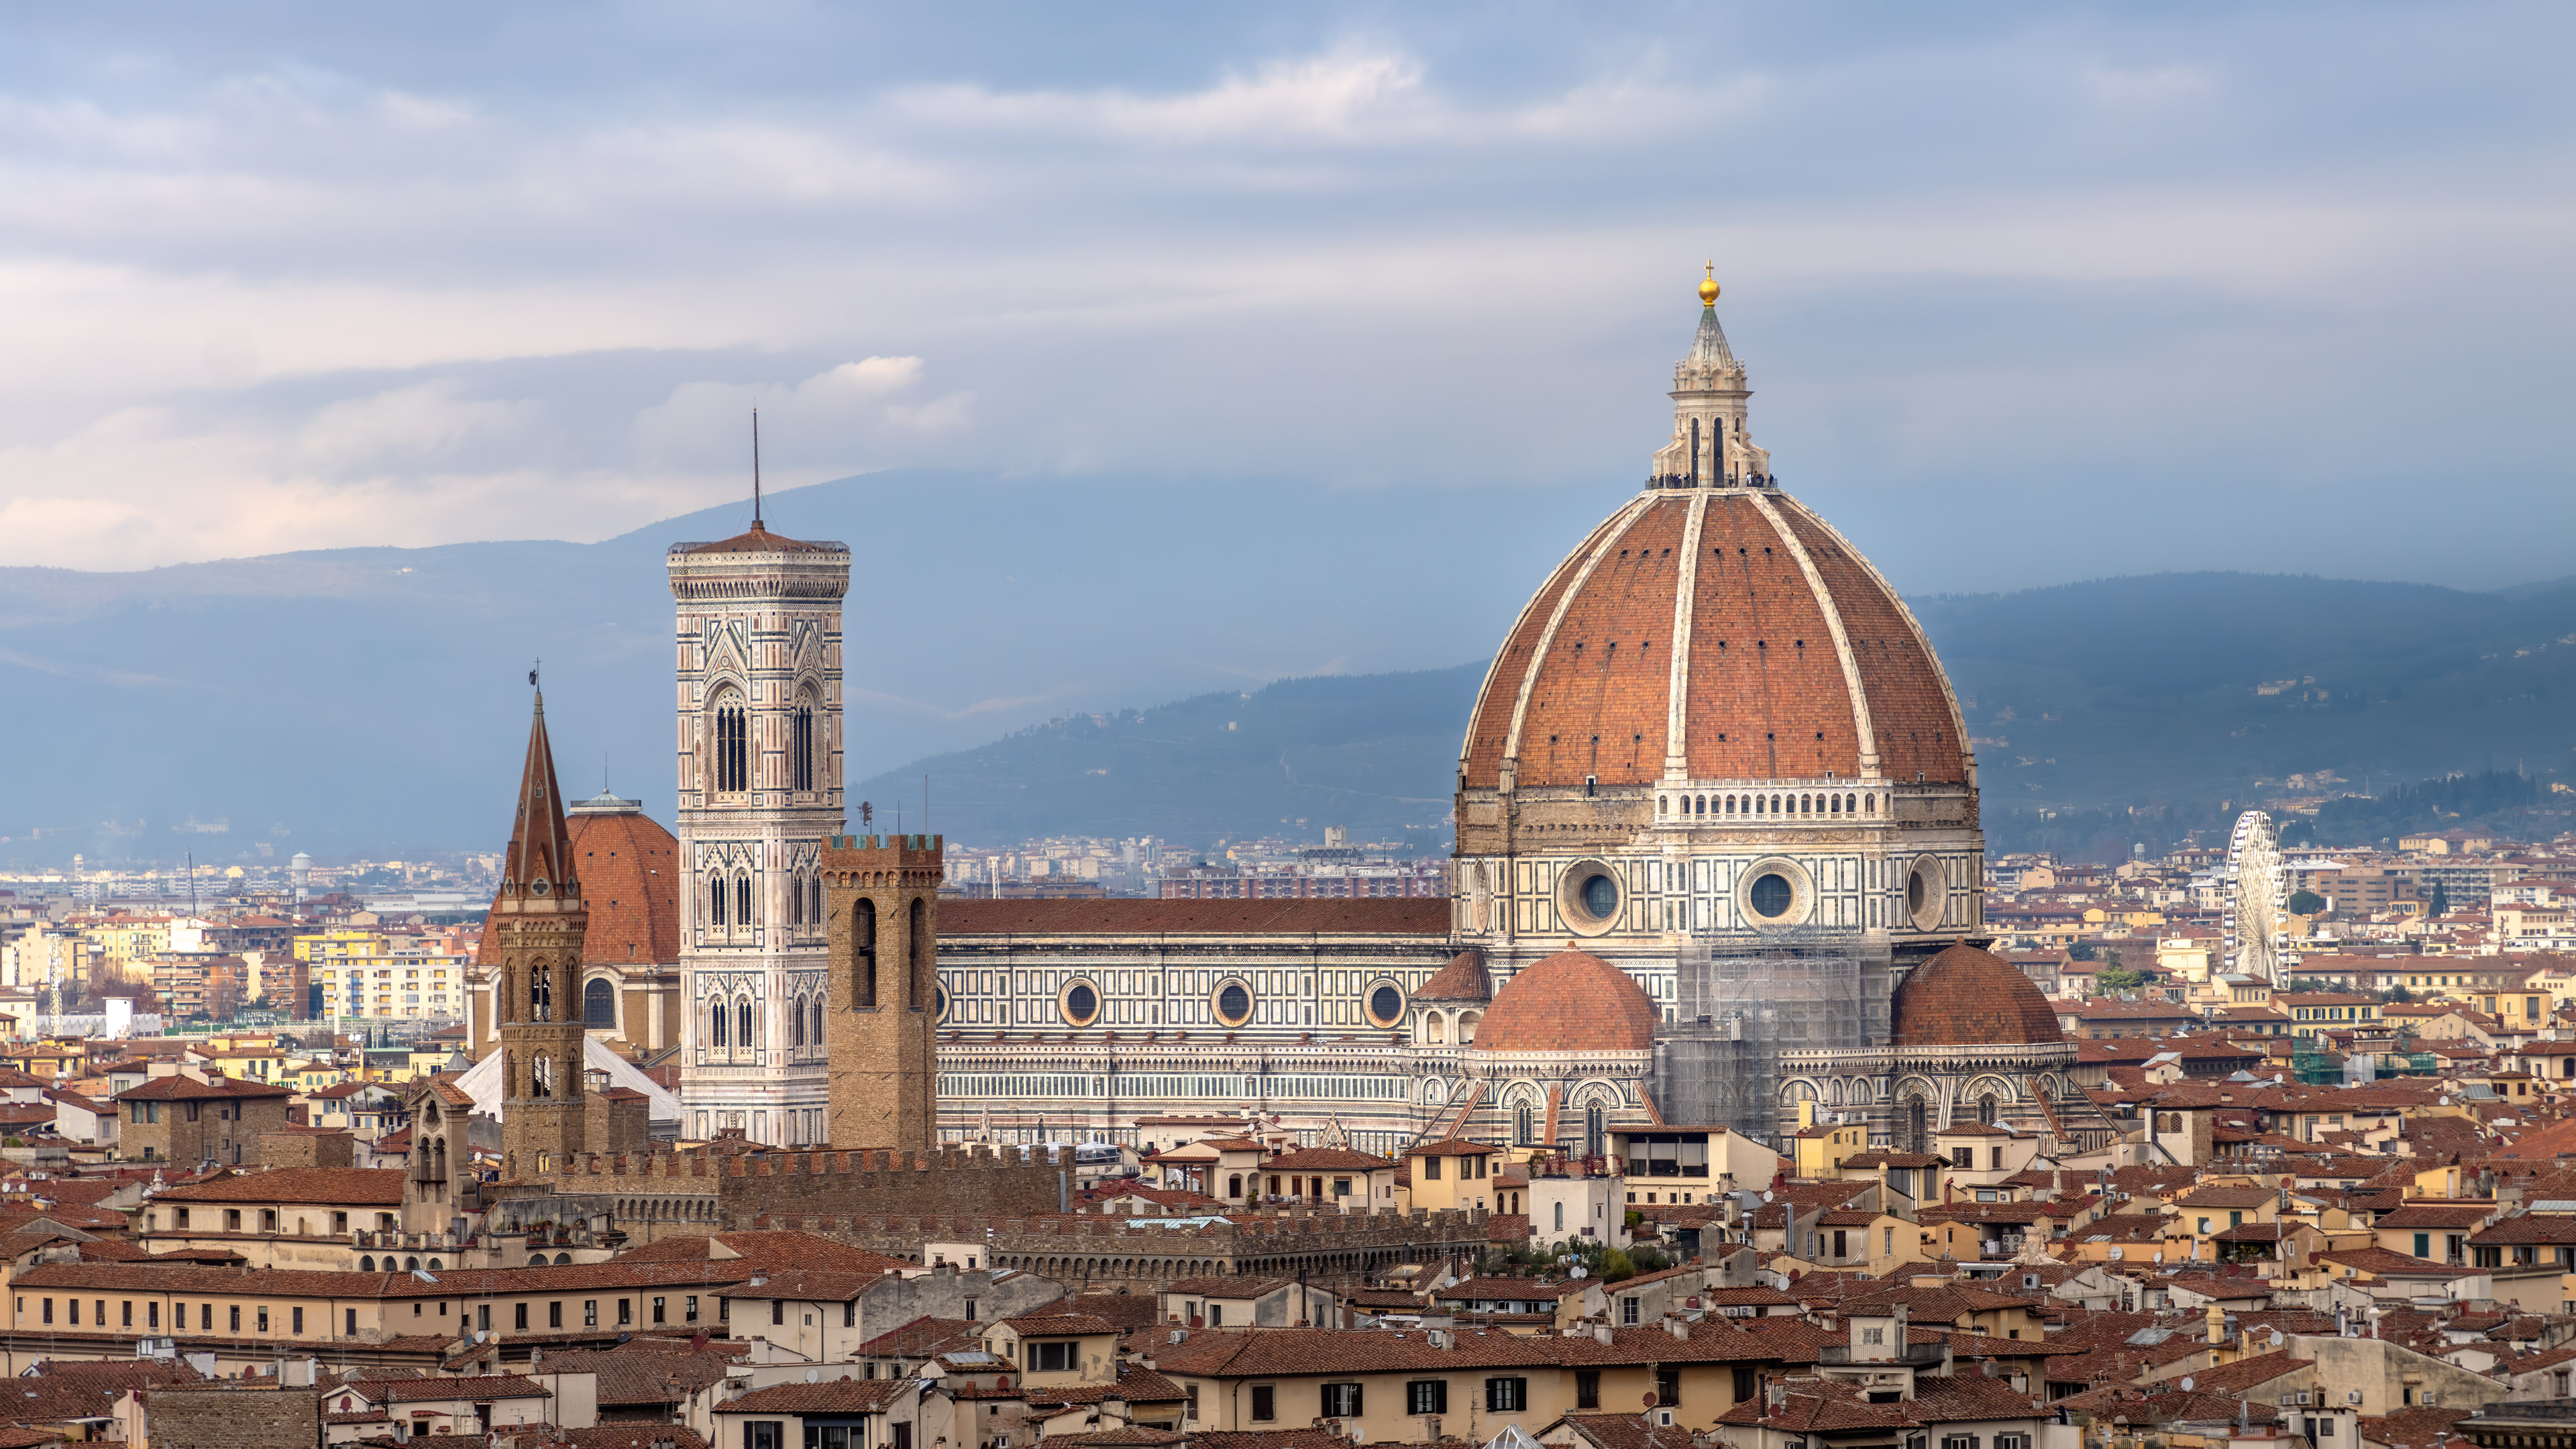 Adorn your screen with the beauty of Florence's cityscape in 4K, featuring the iconic Duomo Cathedral in exquisite detail.